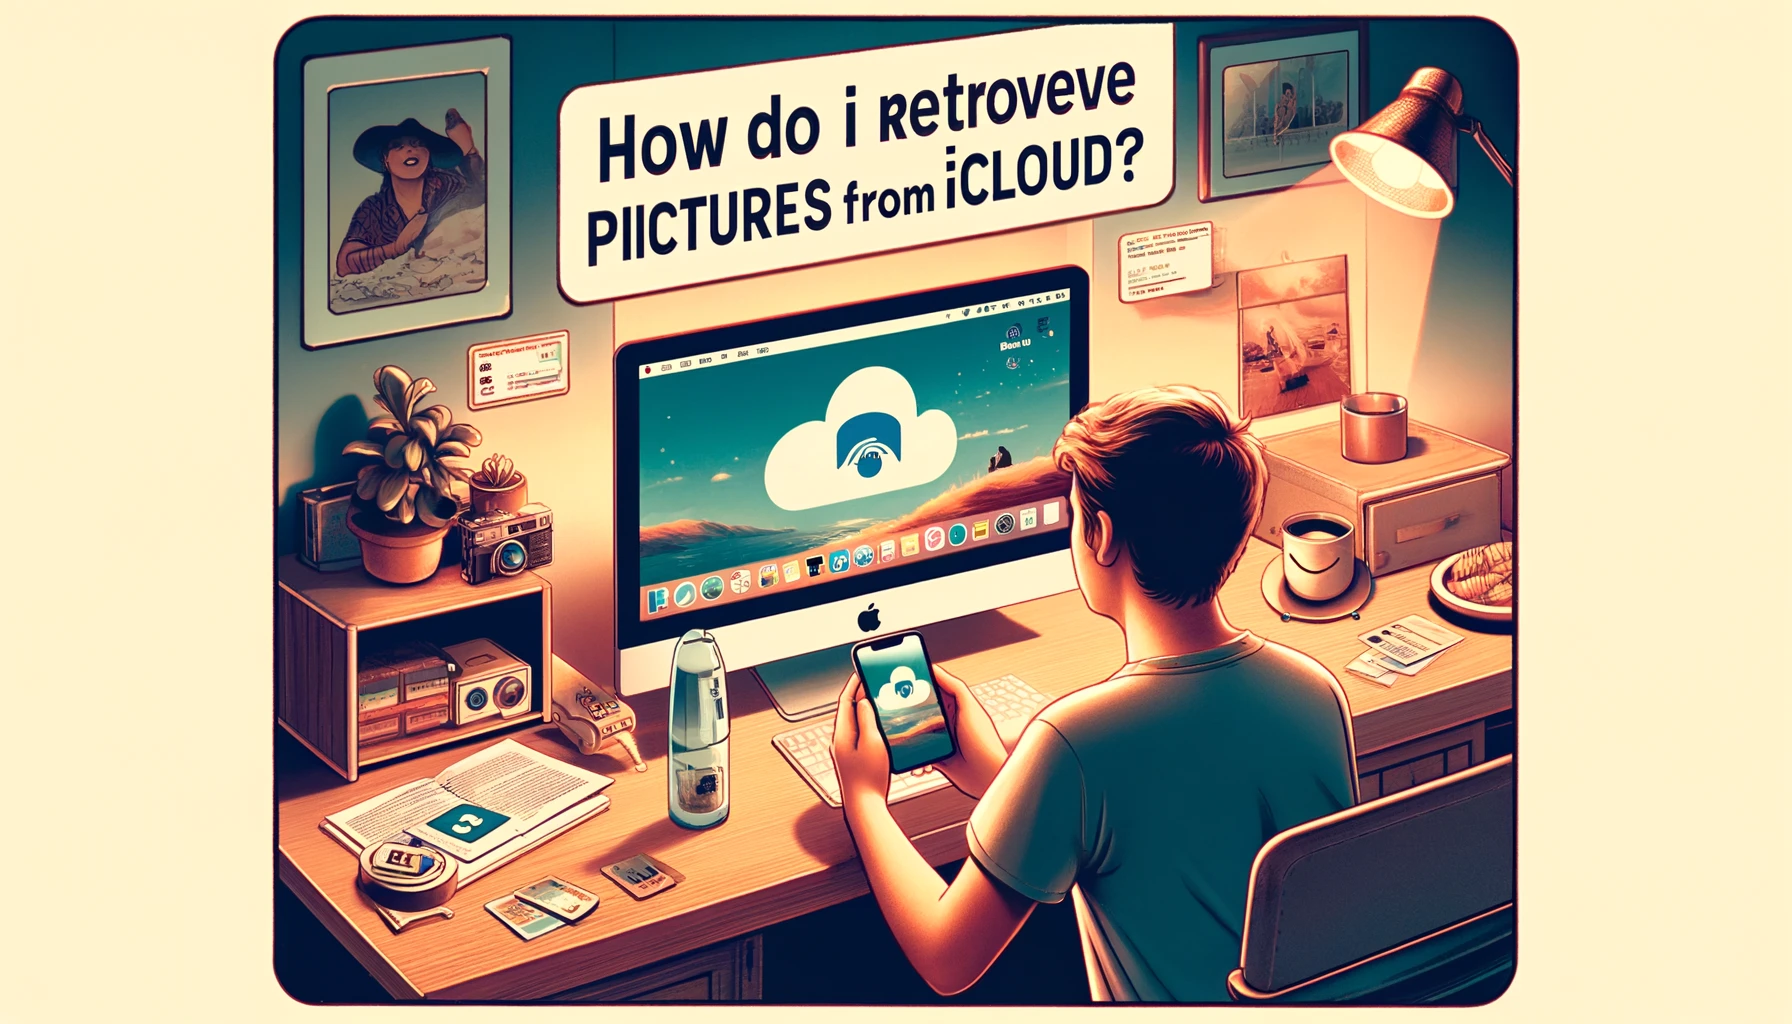 How Do I Retrieve Pictures from iCloud?